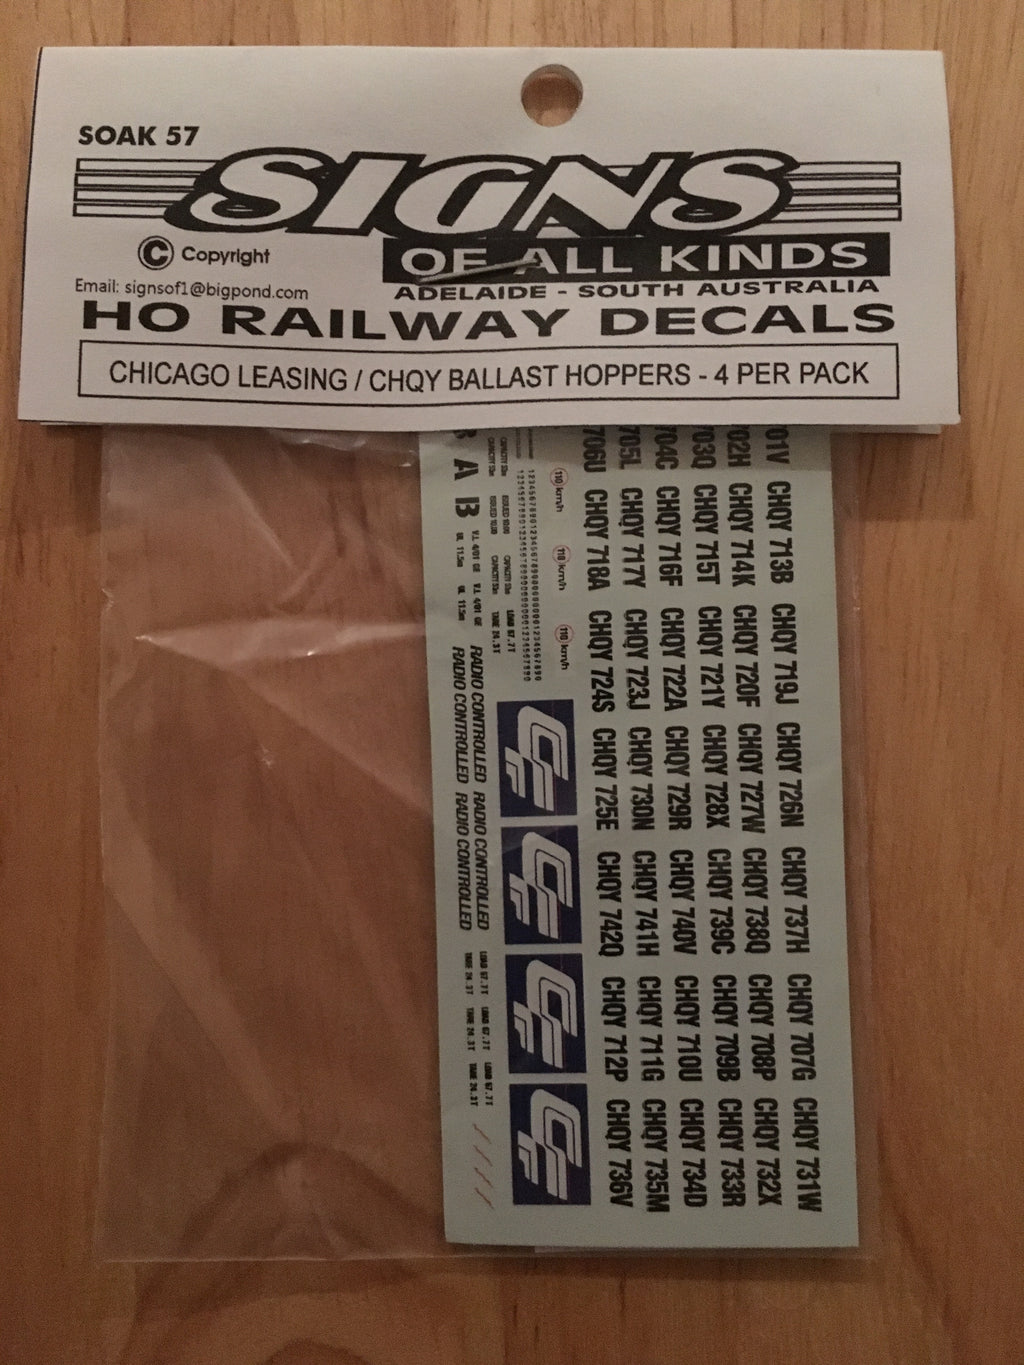 SOAK 57 DEACL for CHICAGO LEASING CHQY BALLAST decal 4 wagons